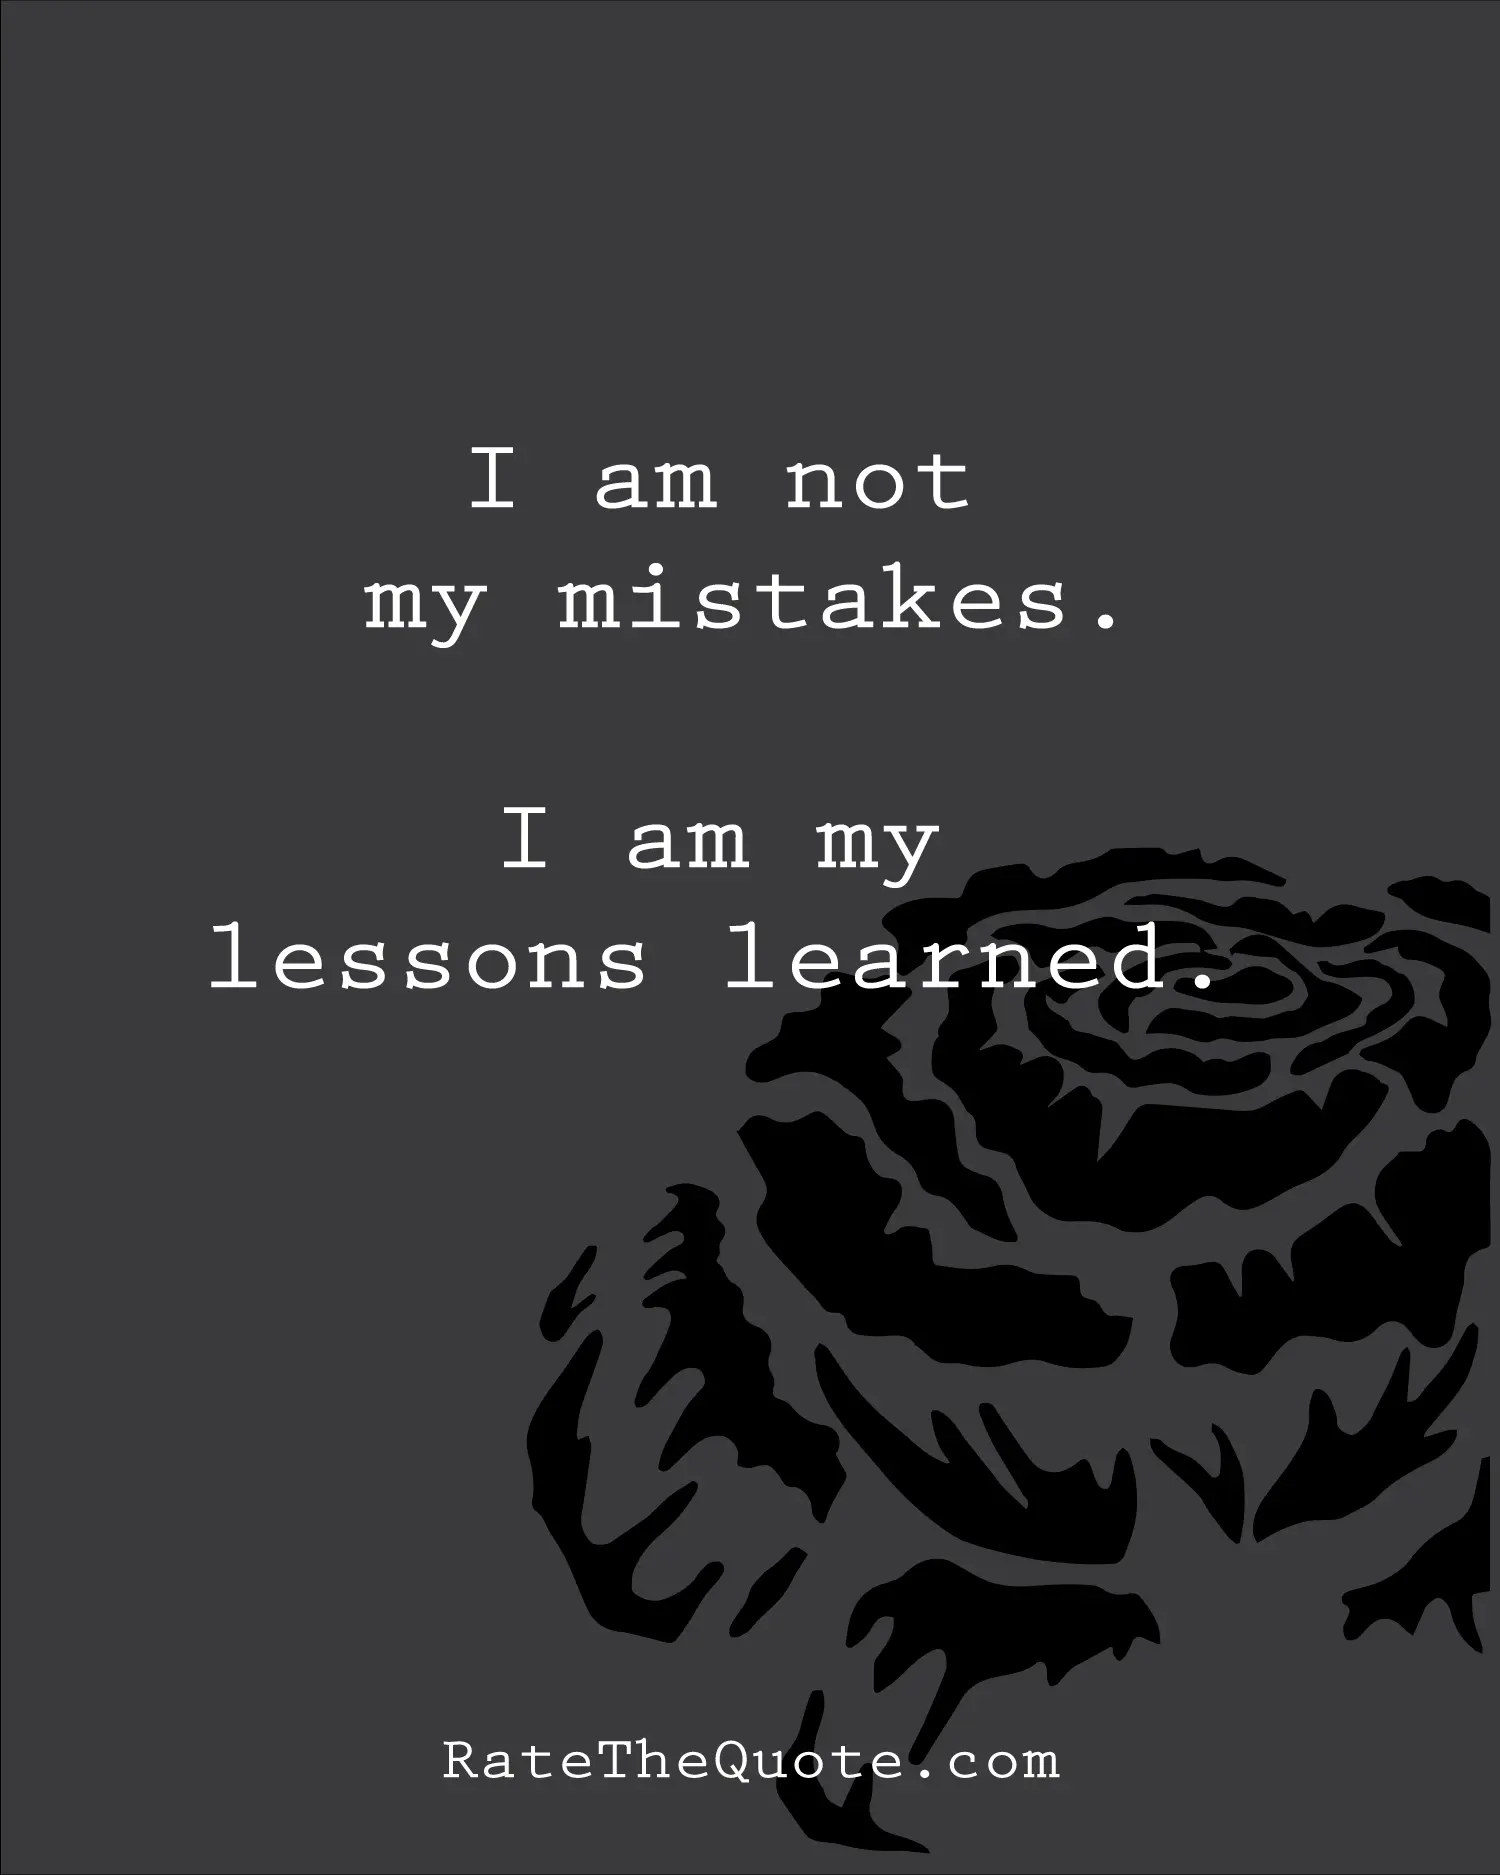 I am not my mistakes. I am my lessons learned.